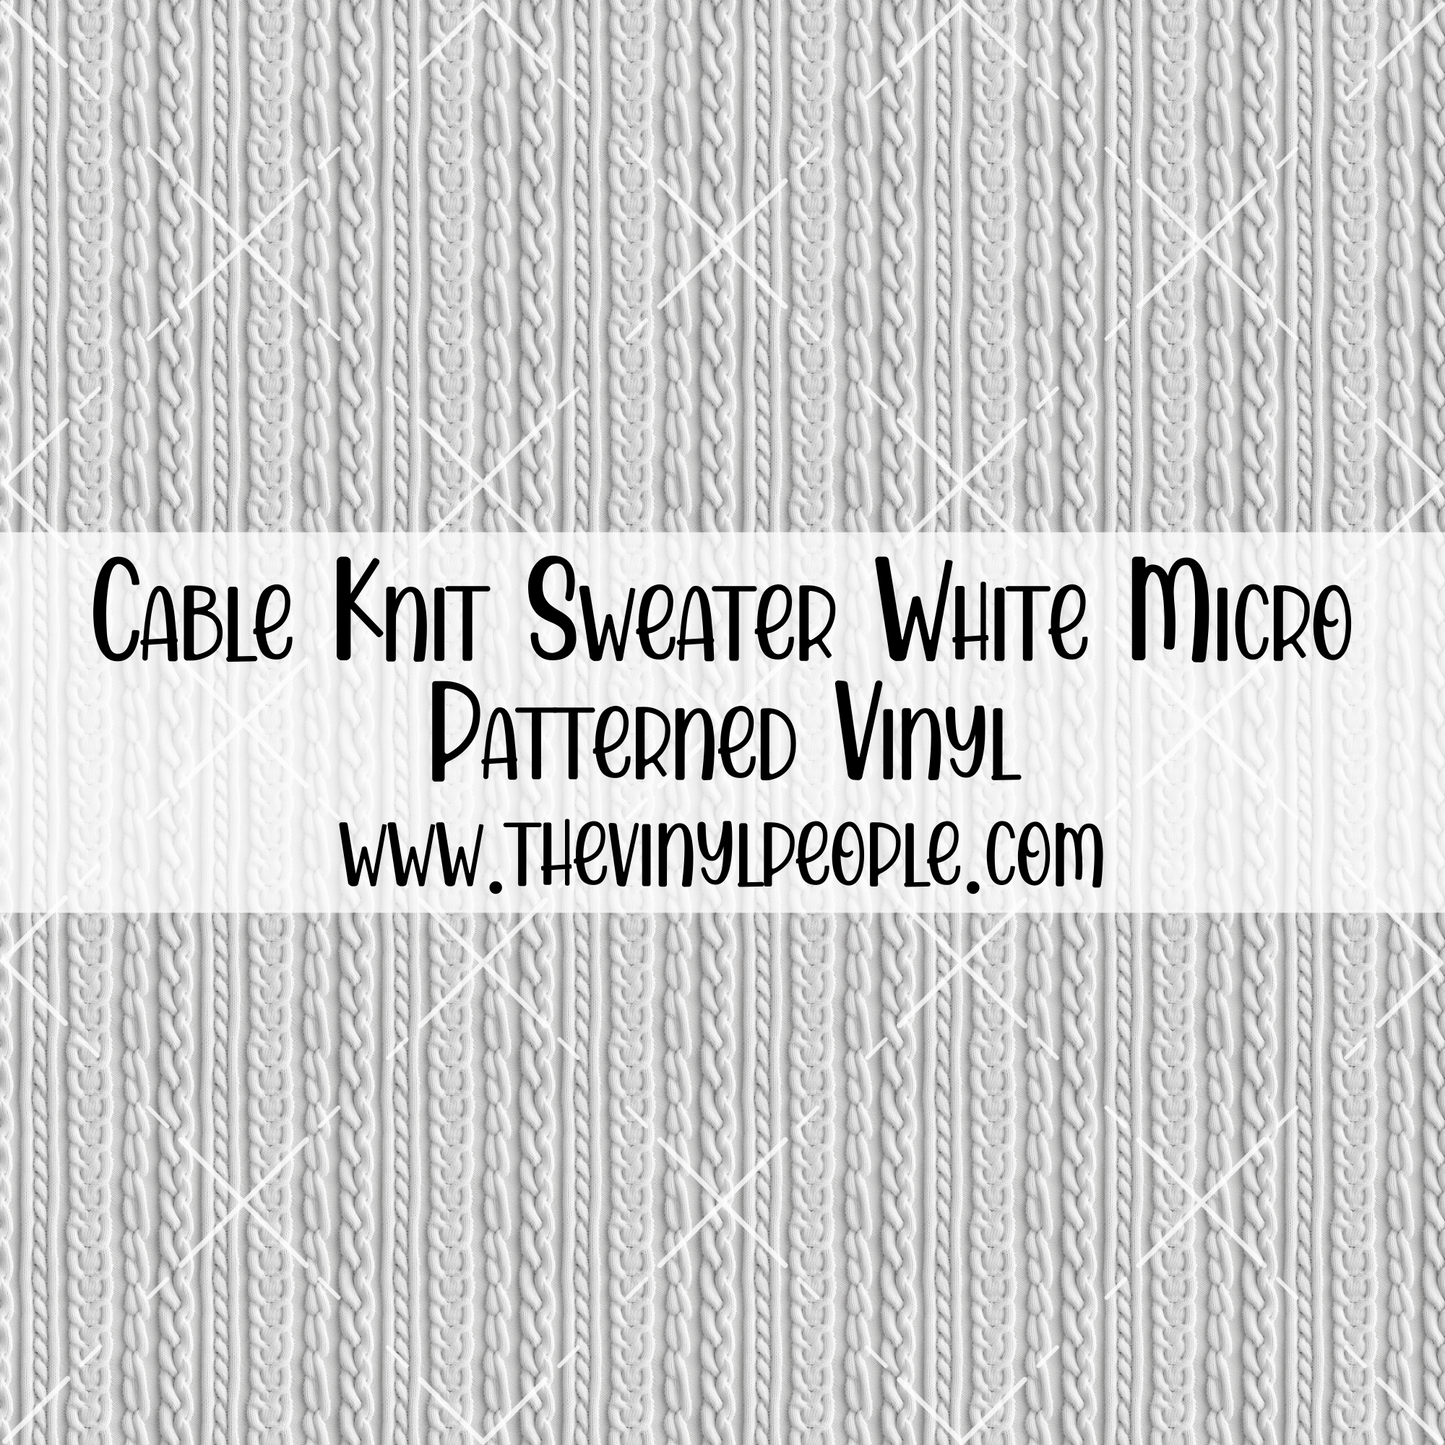 Cable Knit Sweater White Patterned Vinyl